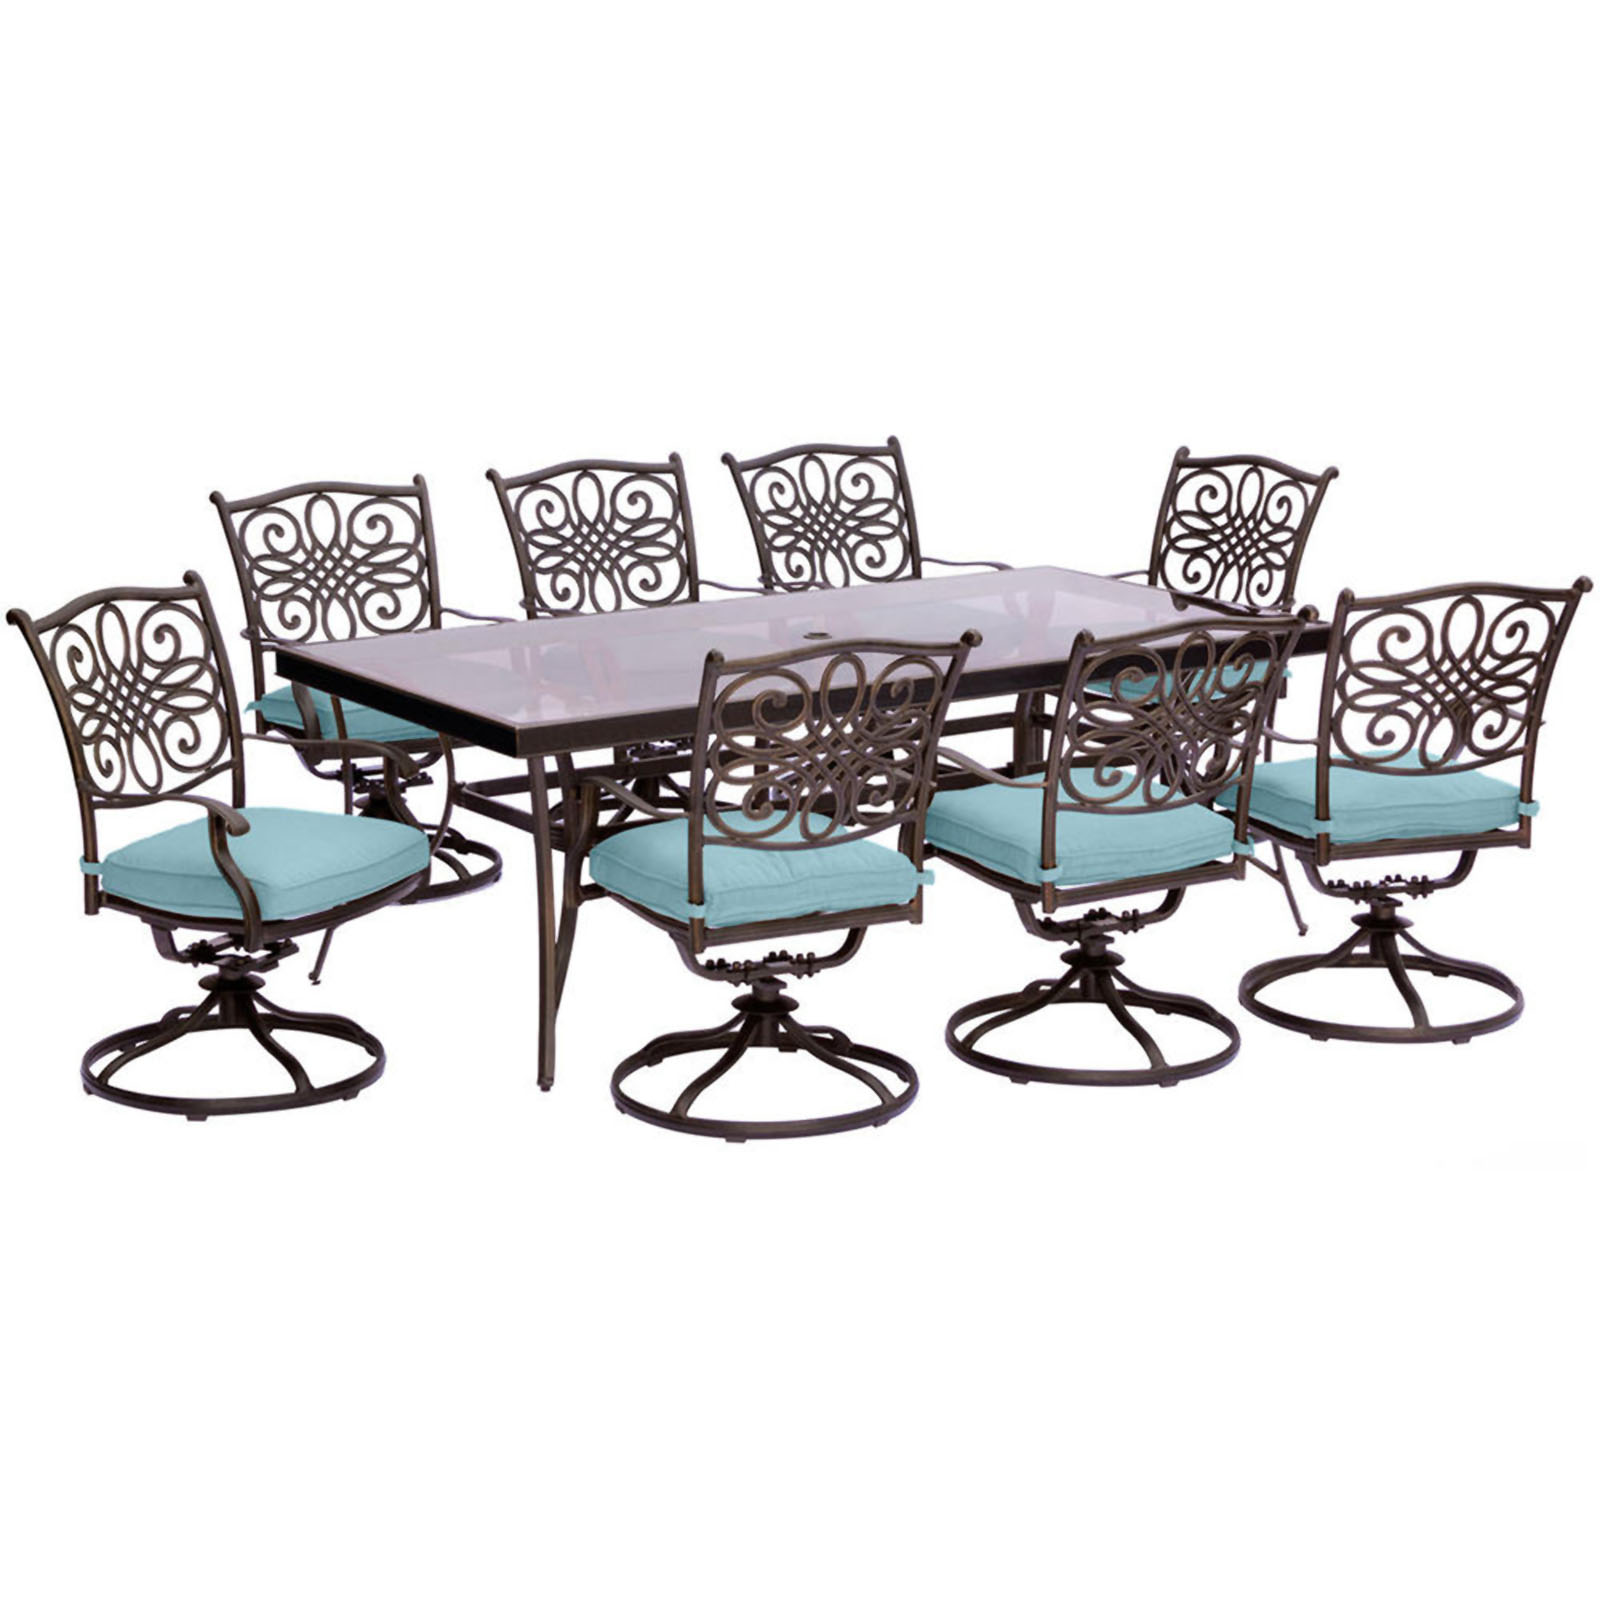 Hanover Traditions 9pc. Outdoor Dining Set with Blue Cushions